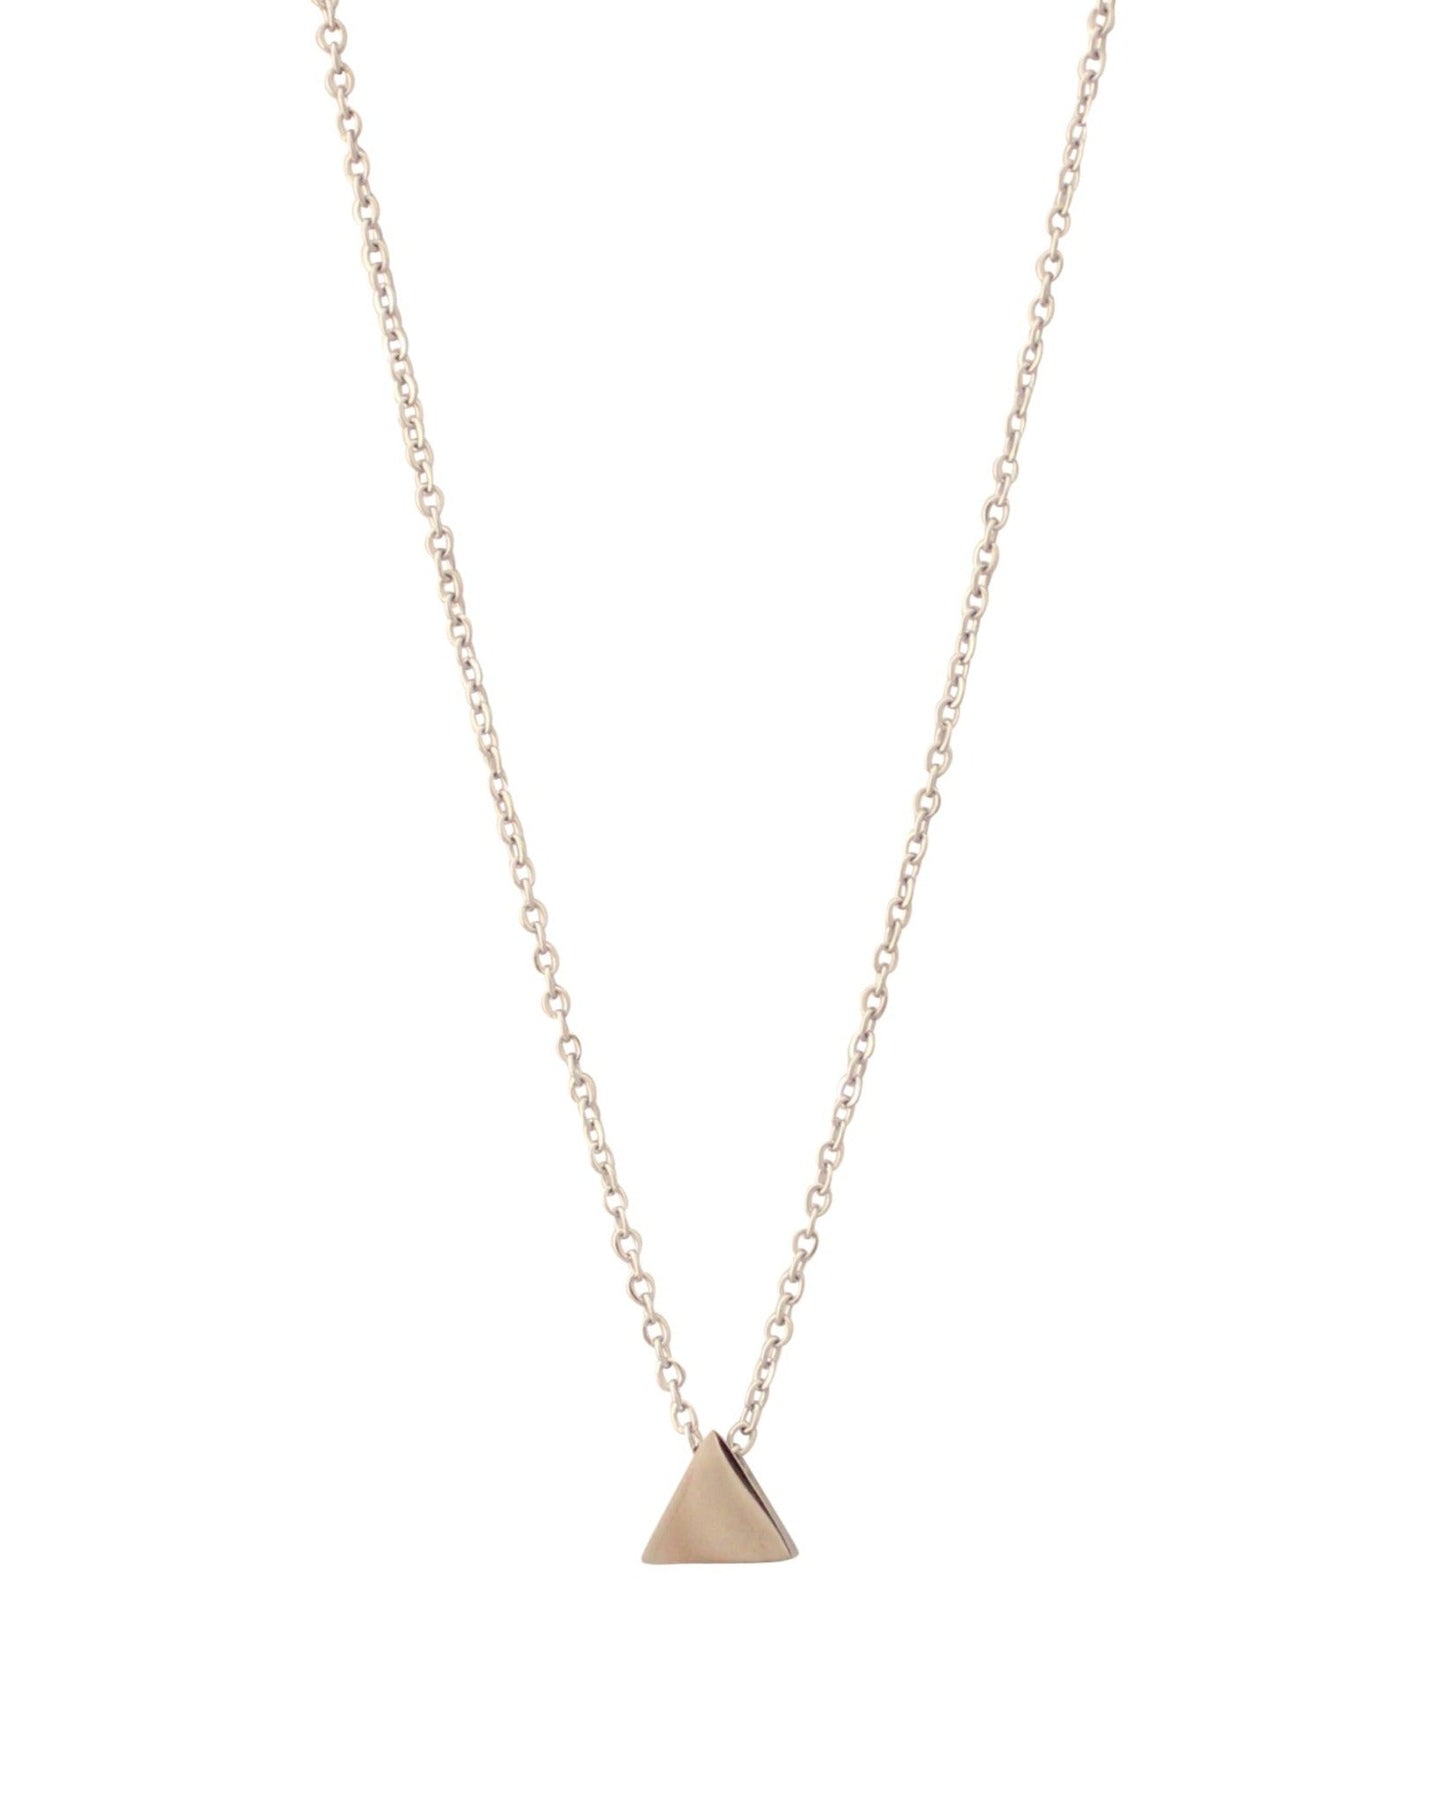 Steady Triangle Necklace in Silver